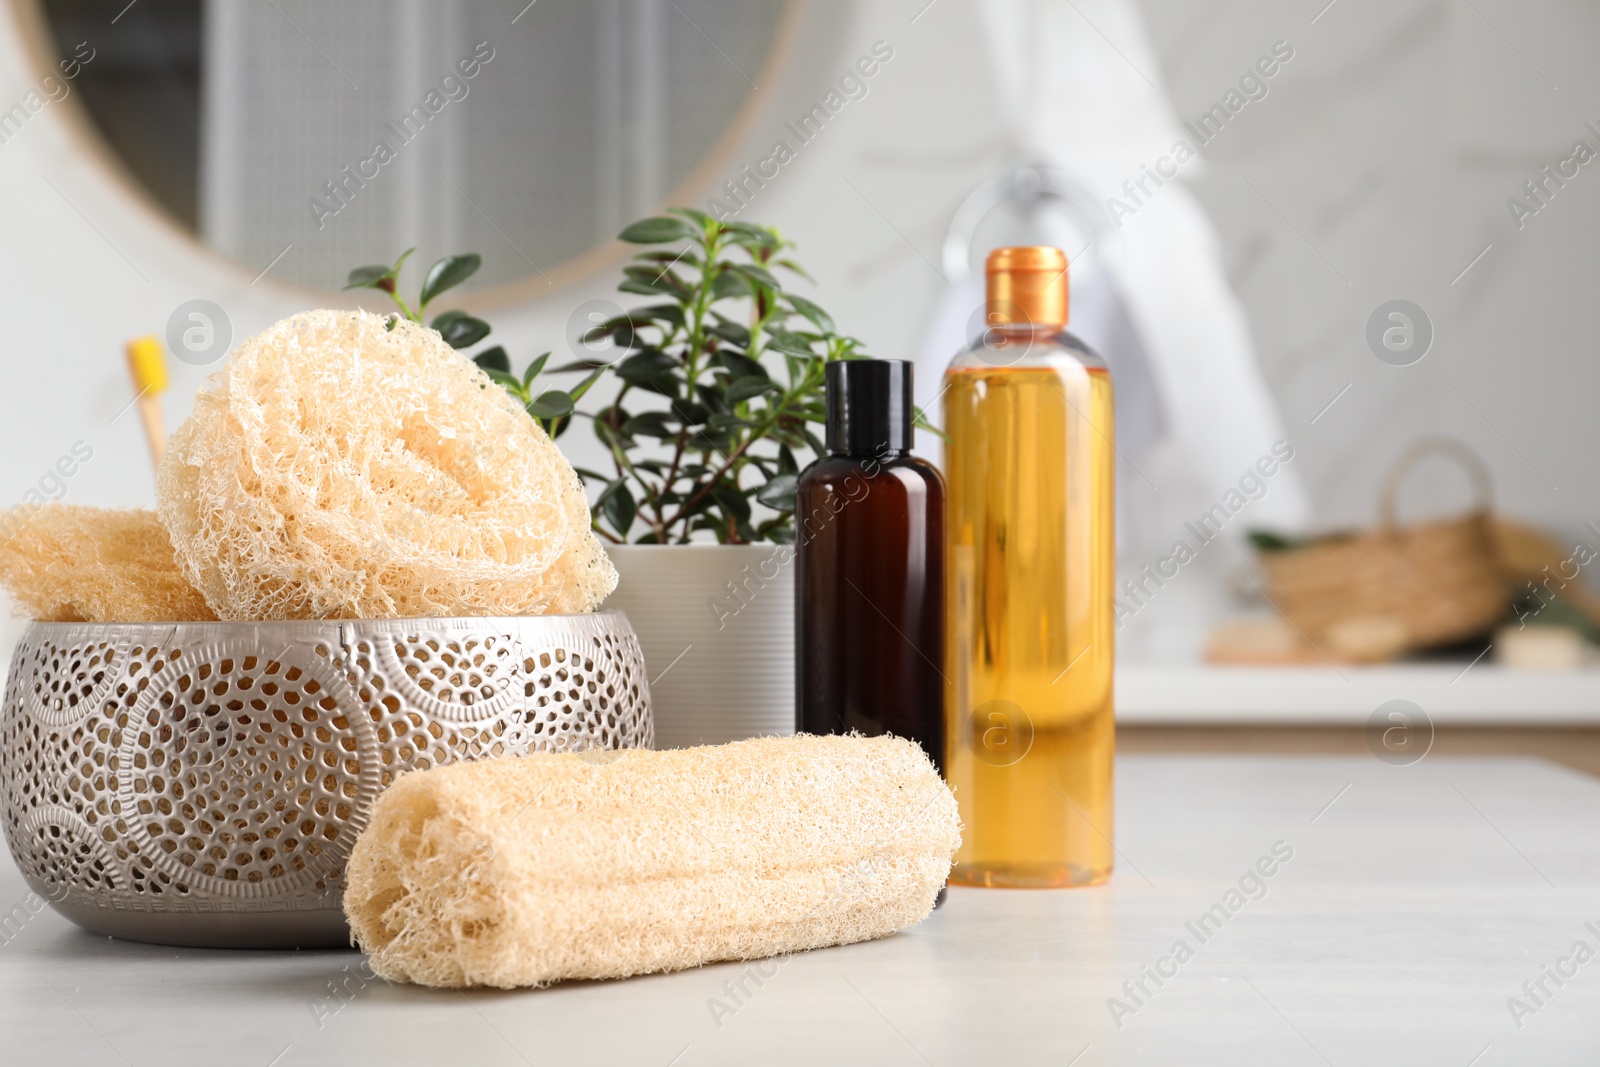 Photo of Natural loofah sponges and personal hygiene products on table in bathroom